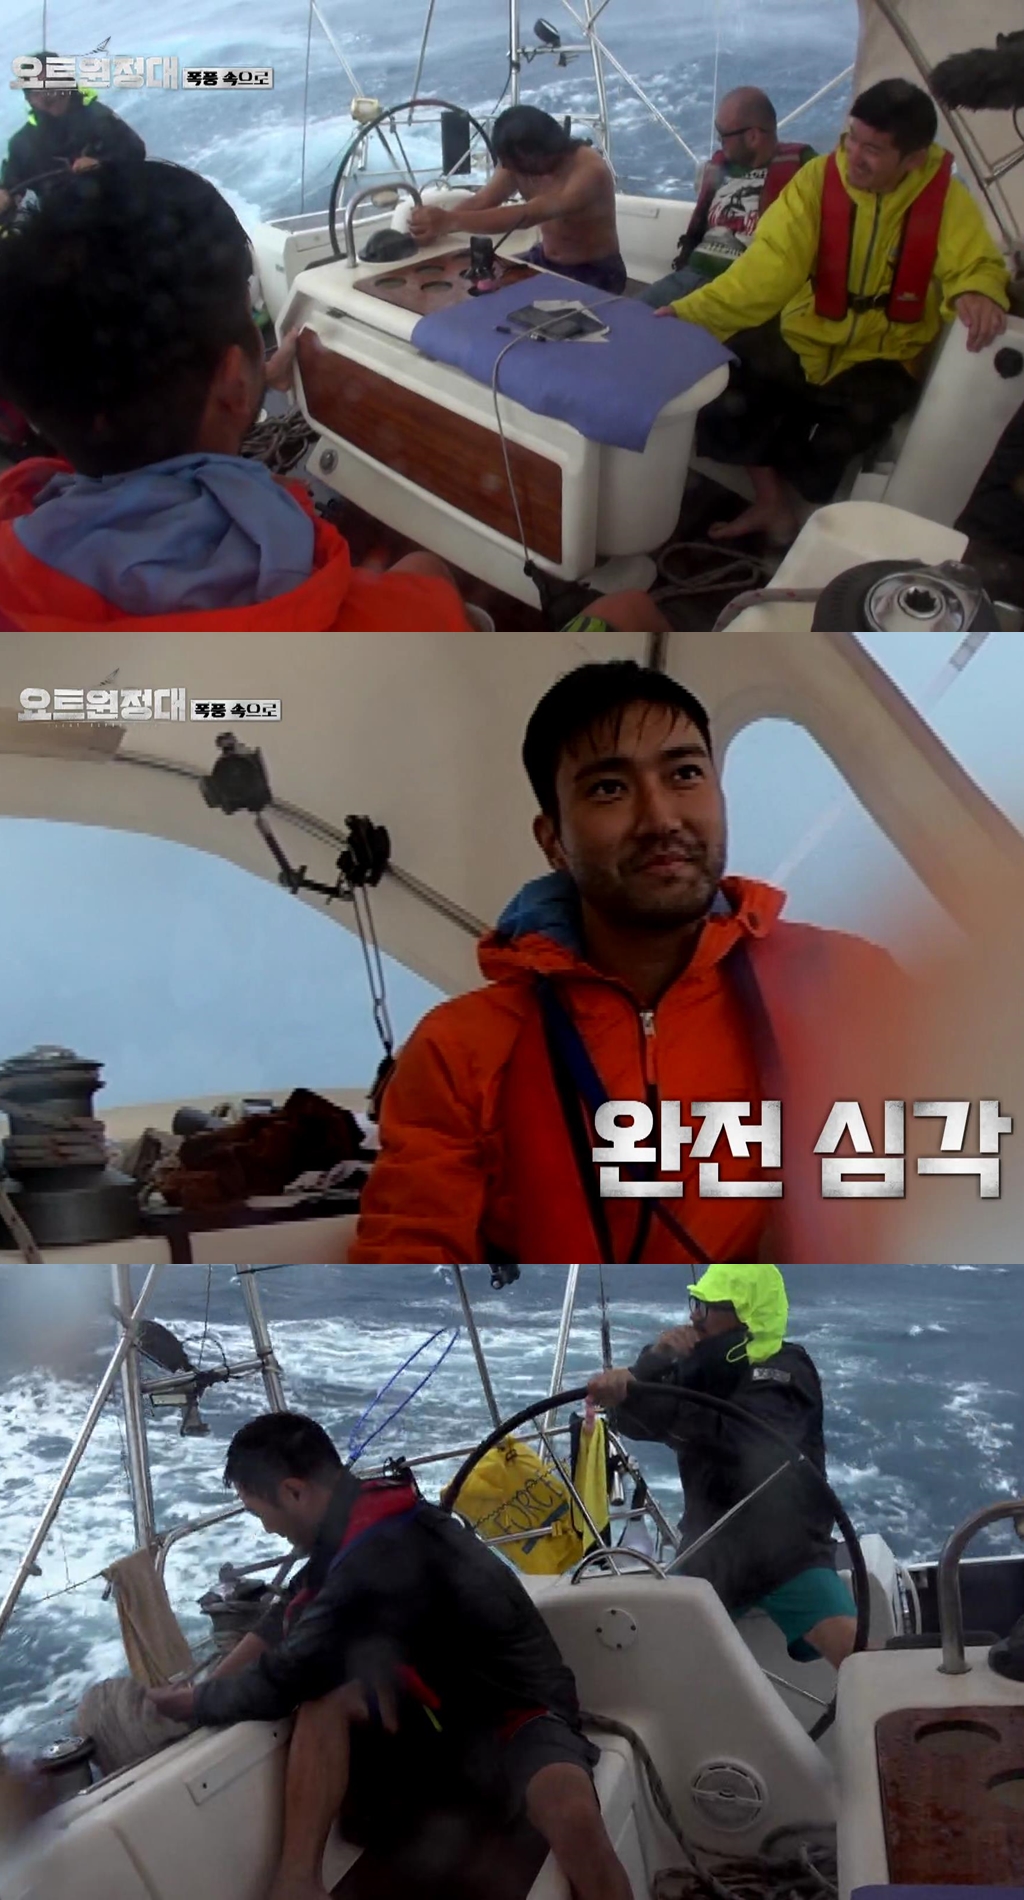 Its really The Waves.Yot Expedition Jin Goo - Choi Siwon - Chang Kiha - Song Ho-joons Pacific Ocean Real Survival will unfold.In the 6th episode of MBC Everlons Yacht Expedition, which will be broadcast on the 21st, it will feature the figure of Jin Goo - Choi Siwon - Chang Kiha - Song Ho-joon, who is driven by extreme storms.The Pacific Ocean sailing scene will be held, which will be the blockbuster of the yacht expedition members who met the rain and wind with the Waves of the past, which is different from the Waves they have experienced so far.In the last broadcast, the yacht expedition facing the rough The Waves on the 5th day of sailing was portrayed.The youngest Choi Siwon climbed onto the deck against The Waves to overcome seasickness, while other crew members also worked together to build a team.Chang Kihas glasses were swept away by The Waves, but the appearance of the yacht expedition, which shouted We are happy without bowing to the rough The Waves, gave a thrilling pleasure.But what is unpredictable is nature. Unlike the expectation, the Yot Expedition members have come to the limit of physical strength in the storm that grows over time.Jin Goo, Choi Siwon, Chang Kiha and Song Ho-joon, who seem to have a soul in the public photos, steal their eyes.Outside the yacht, you can see the huge The Waves, and the appearance of the yacht in the wreckage makes you guess the serious situation at the time.Choi Siwon said, The Waves really are.It was so hard to shake up and down, from side to side, he recalled, and told him about his first experience in the rough sea.Even Chang Kiha, who was less difficult because he did not get seasick, left a frank statement saying, I thought I was just going on a boat, but this is not easy.The netizens are responding that The Waves is really hard to count, I would have been really hard to get sick even if I was on a boat, and It is an unforgettable experience.On the other hand, the 6th MBC Everlon Yacht Expedition, where Jin Goo - Choi Siwon - Chang Kiha - Song Ho-joon, who has experienced the past class experience that they can not live in, will be broadcast at 8:30 pm on the 21st (Monday).iMBC Baek A-young  Photos Provided MBC Everlon